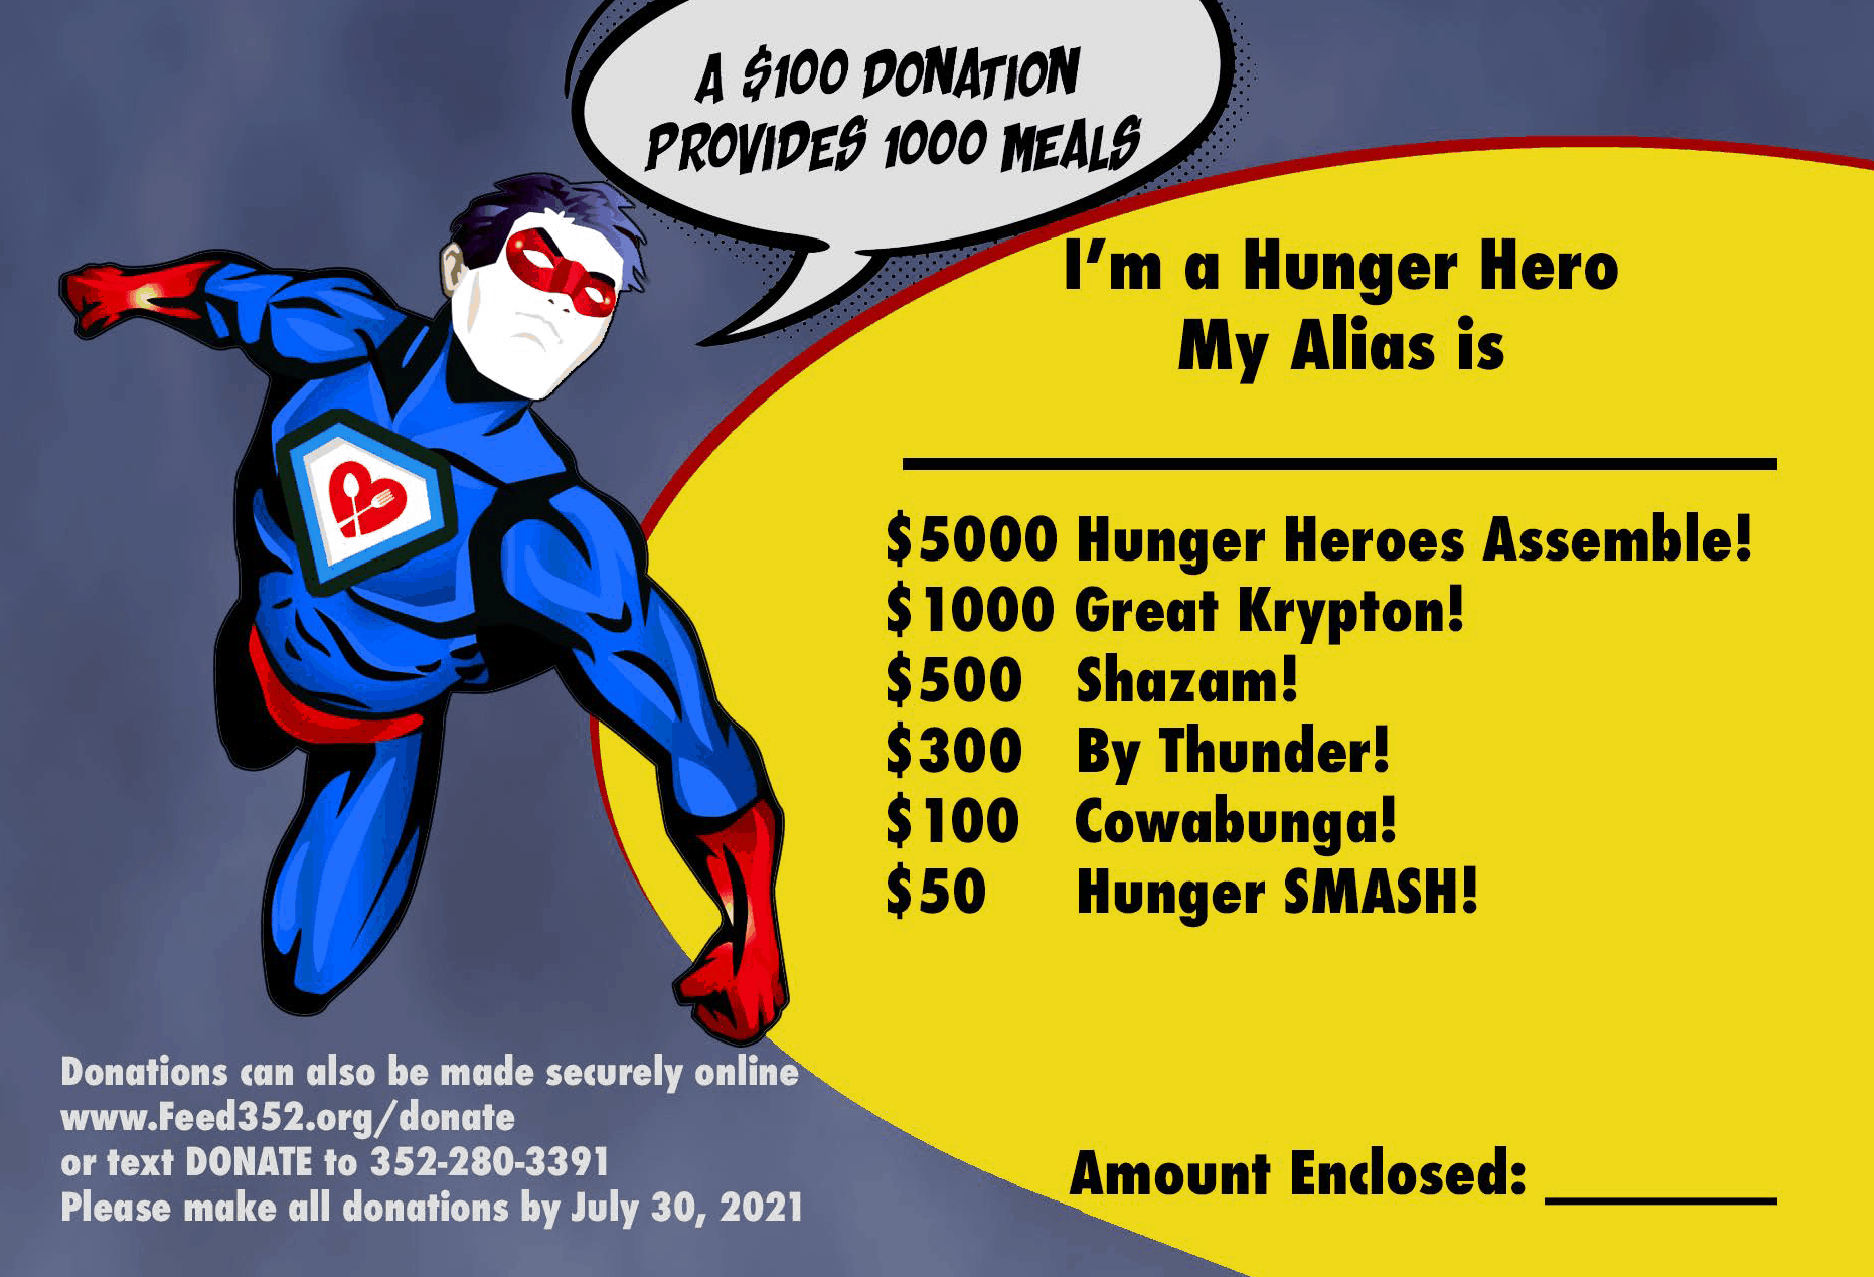 Become a Hunger Hero!